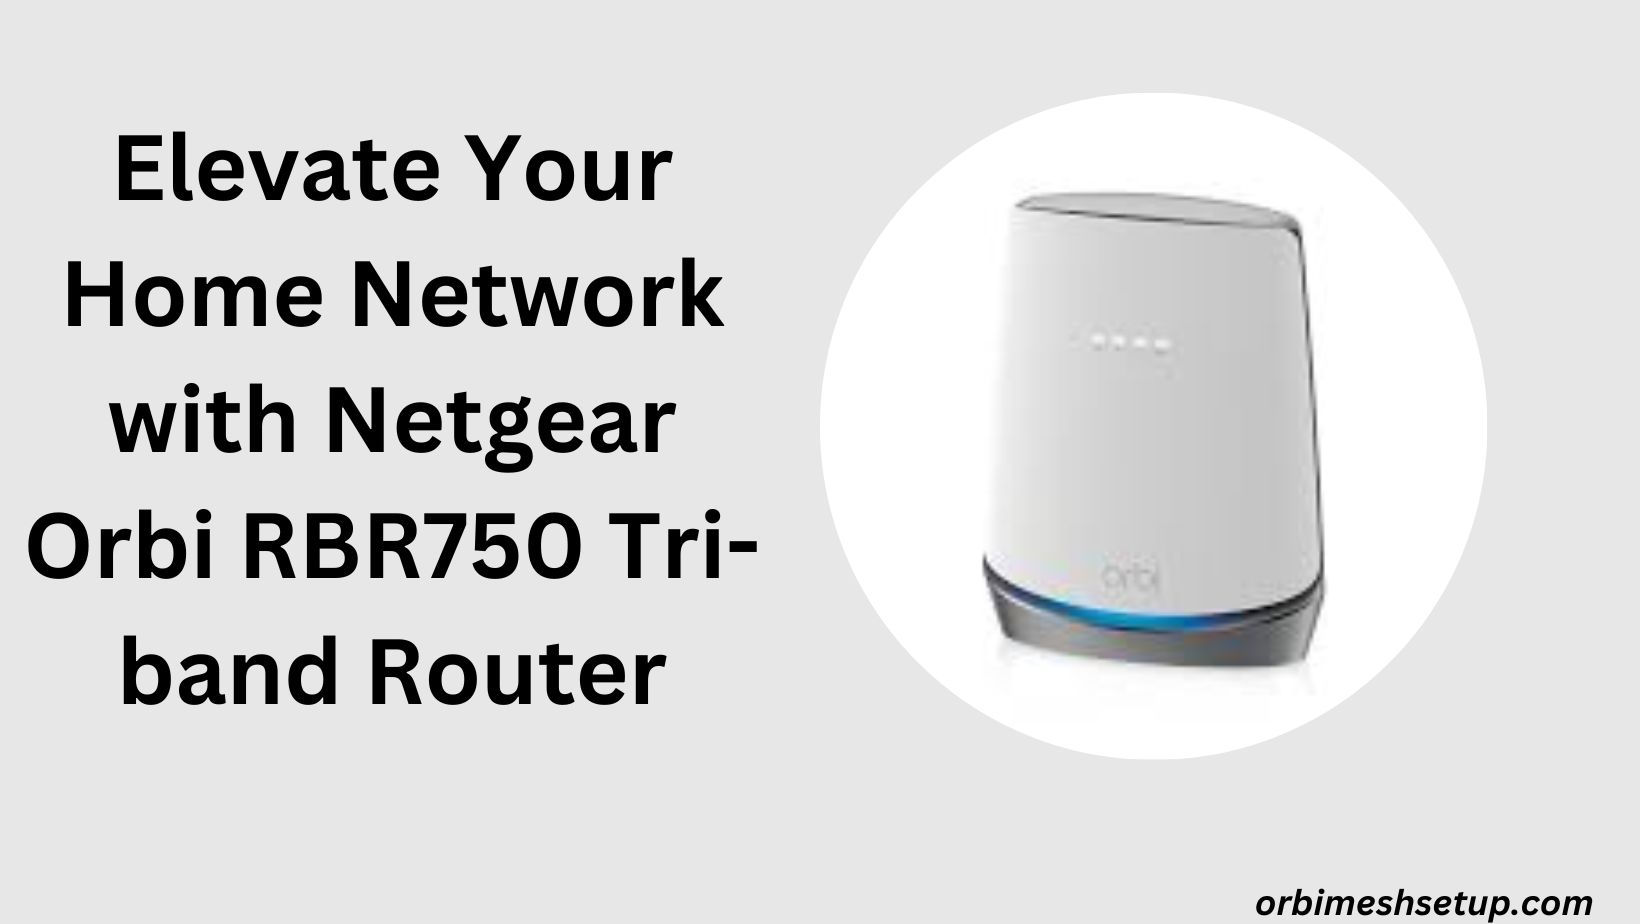 You are currently viewing Elevate Your Home Network with Netgear Orbi RBR750 Tri-band Router